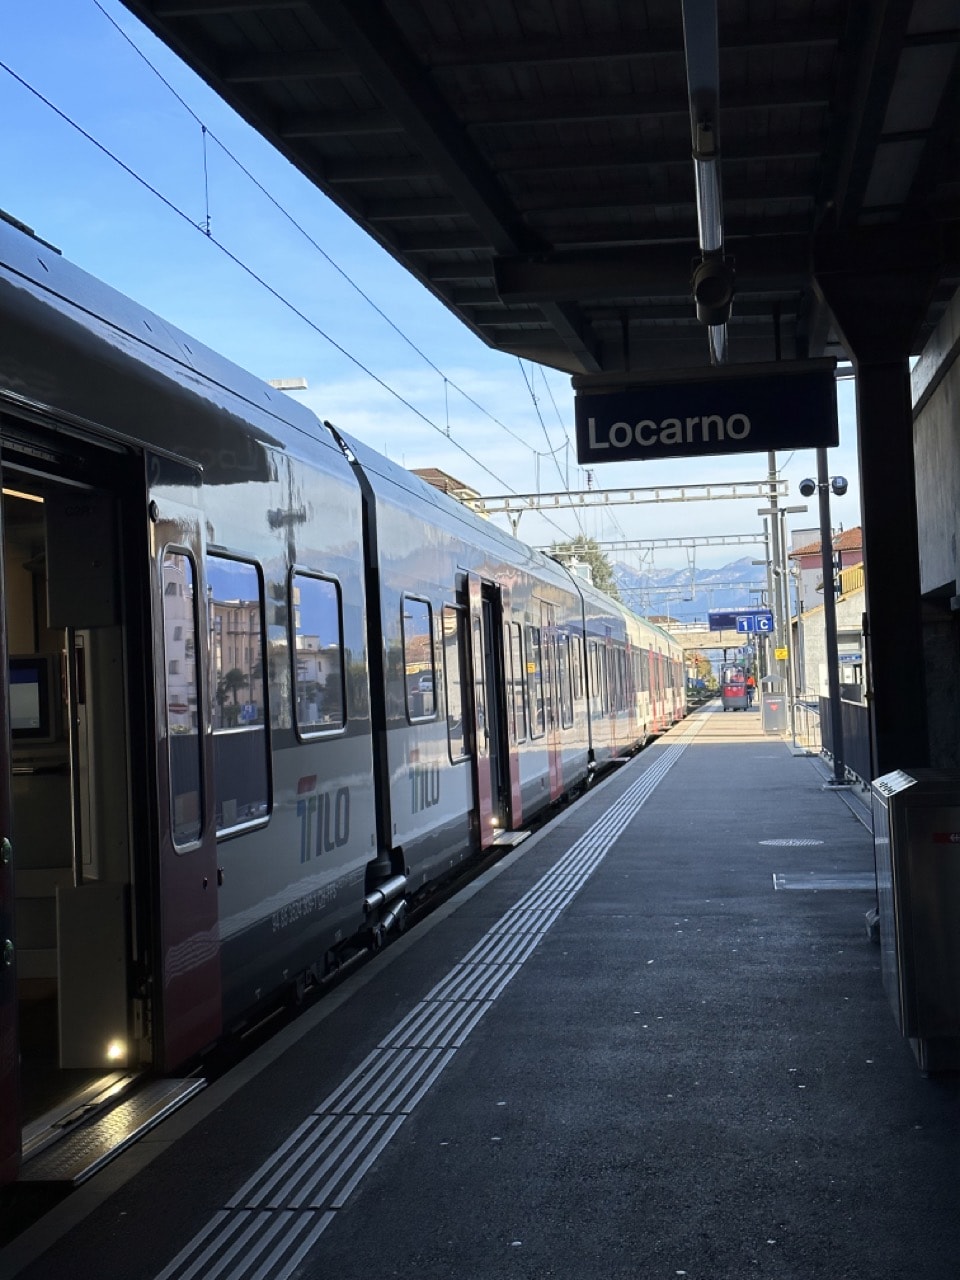 Arrival of a train at Locarno station